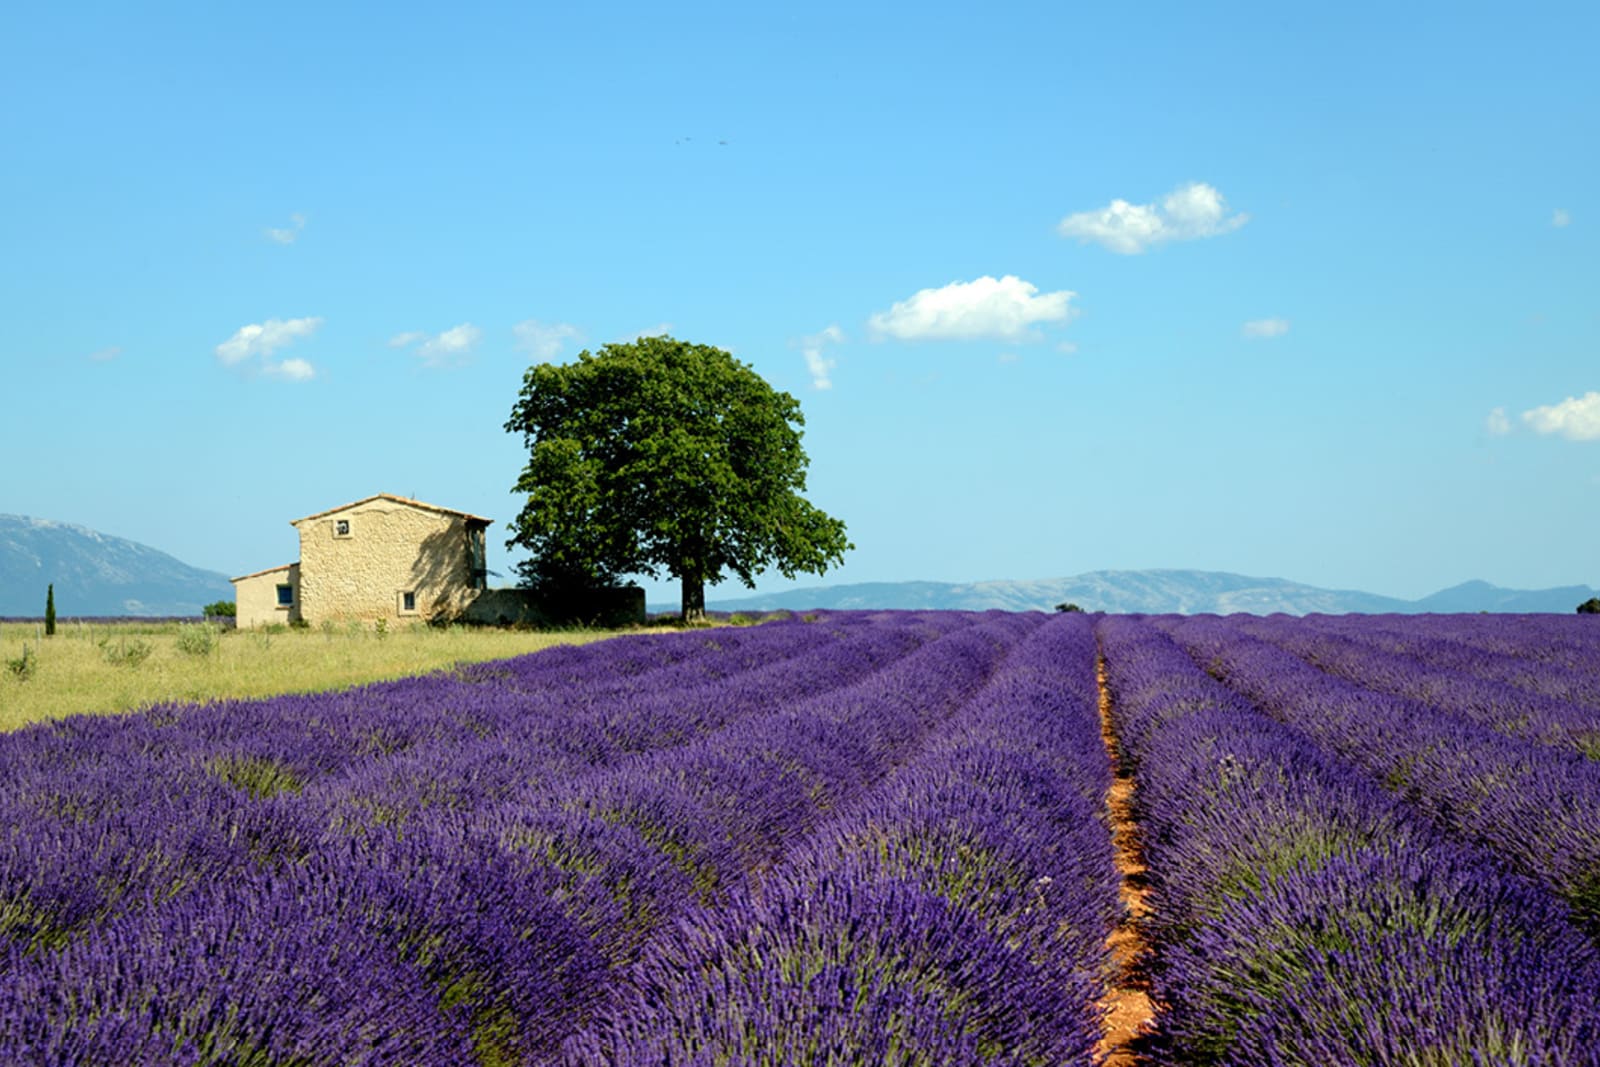 Lavender fields are among the top attractions in Aix-en-Provence